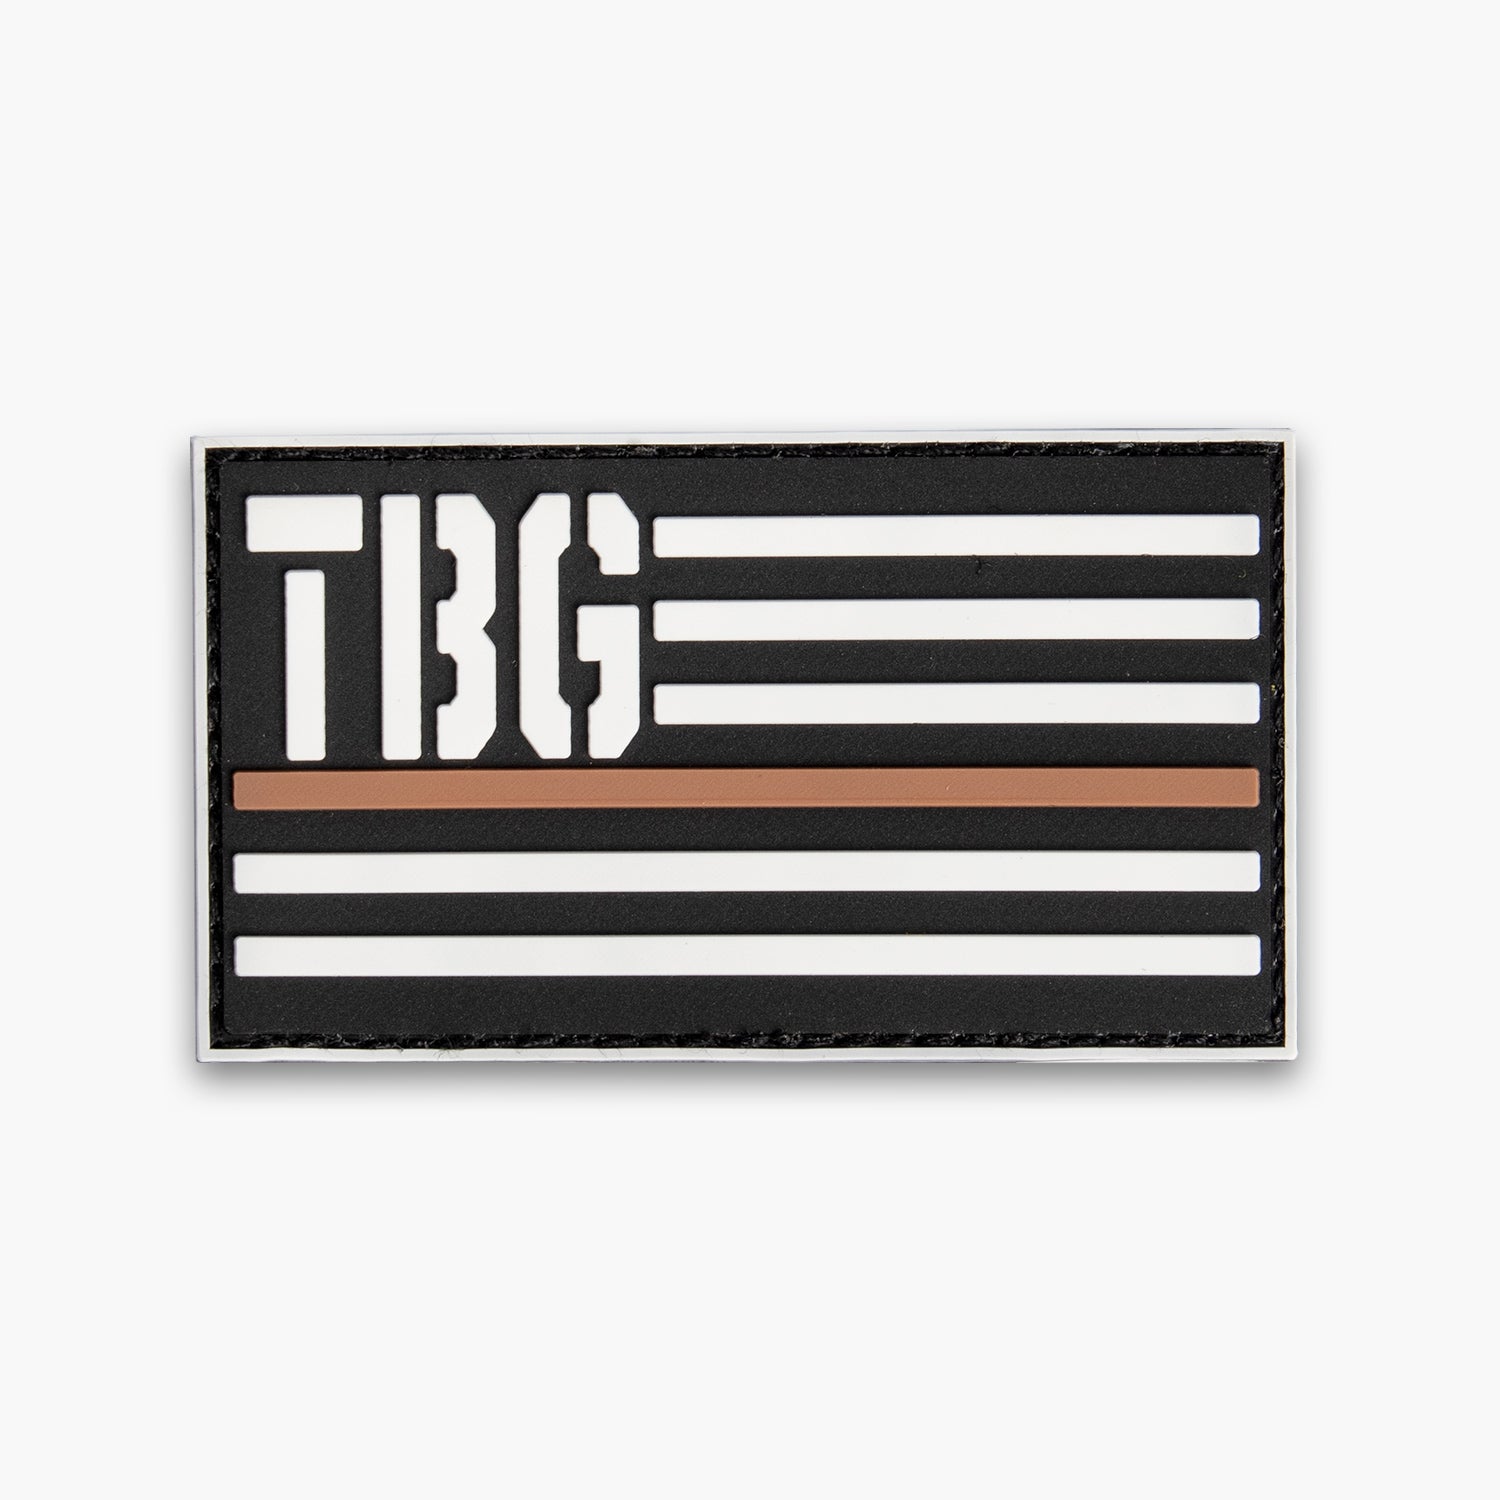 Tbg Thin Brown Line Patch